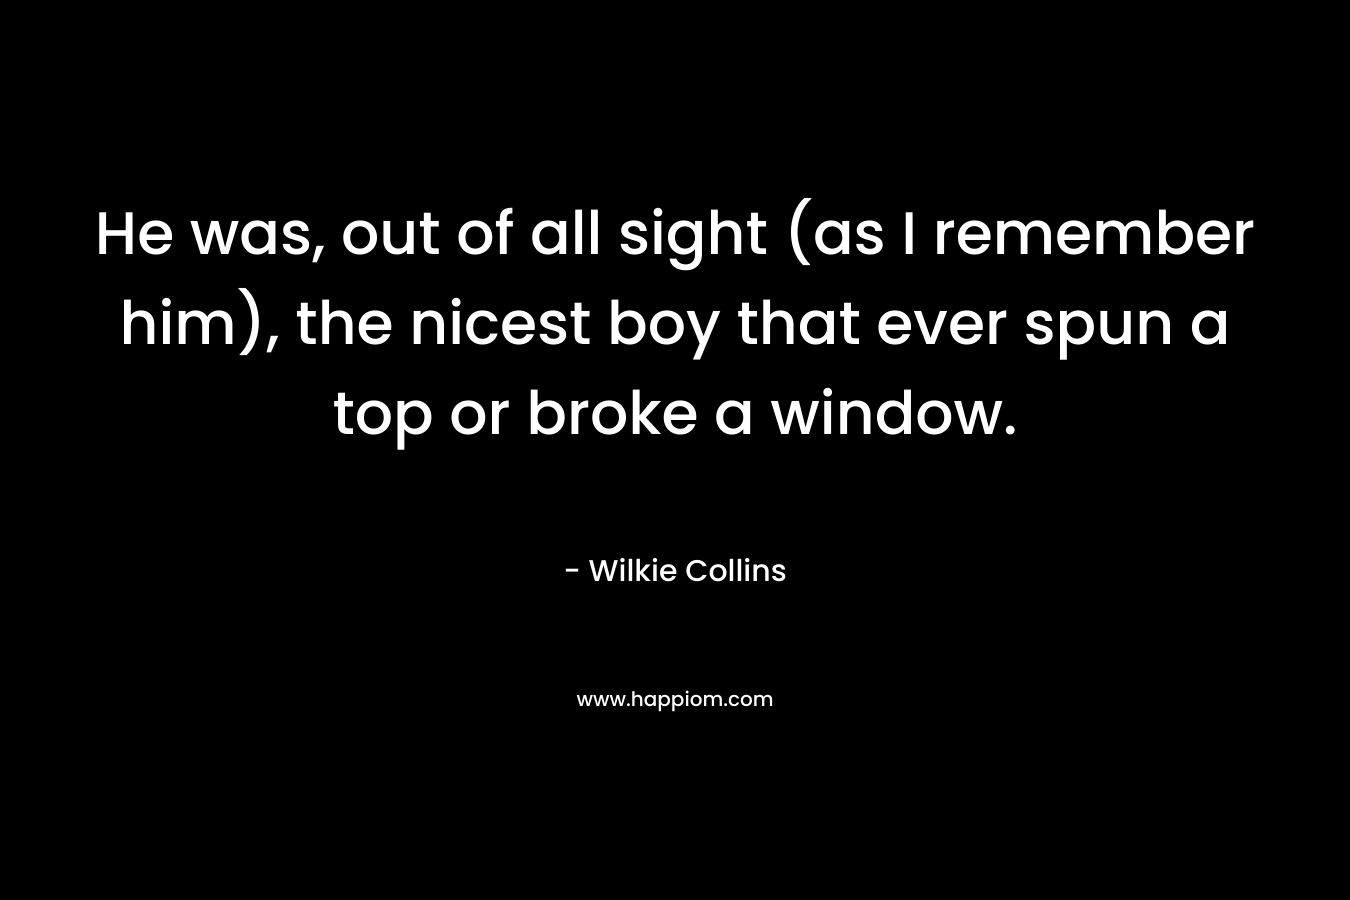 He was, out of all sight (as I remember him), the nicest boy that ever spun a top or broke a window. – Wilkie Collins